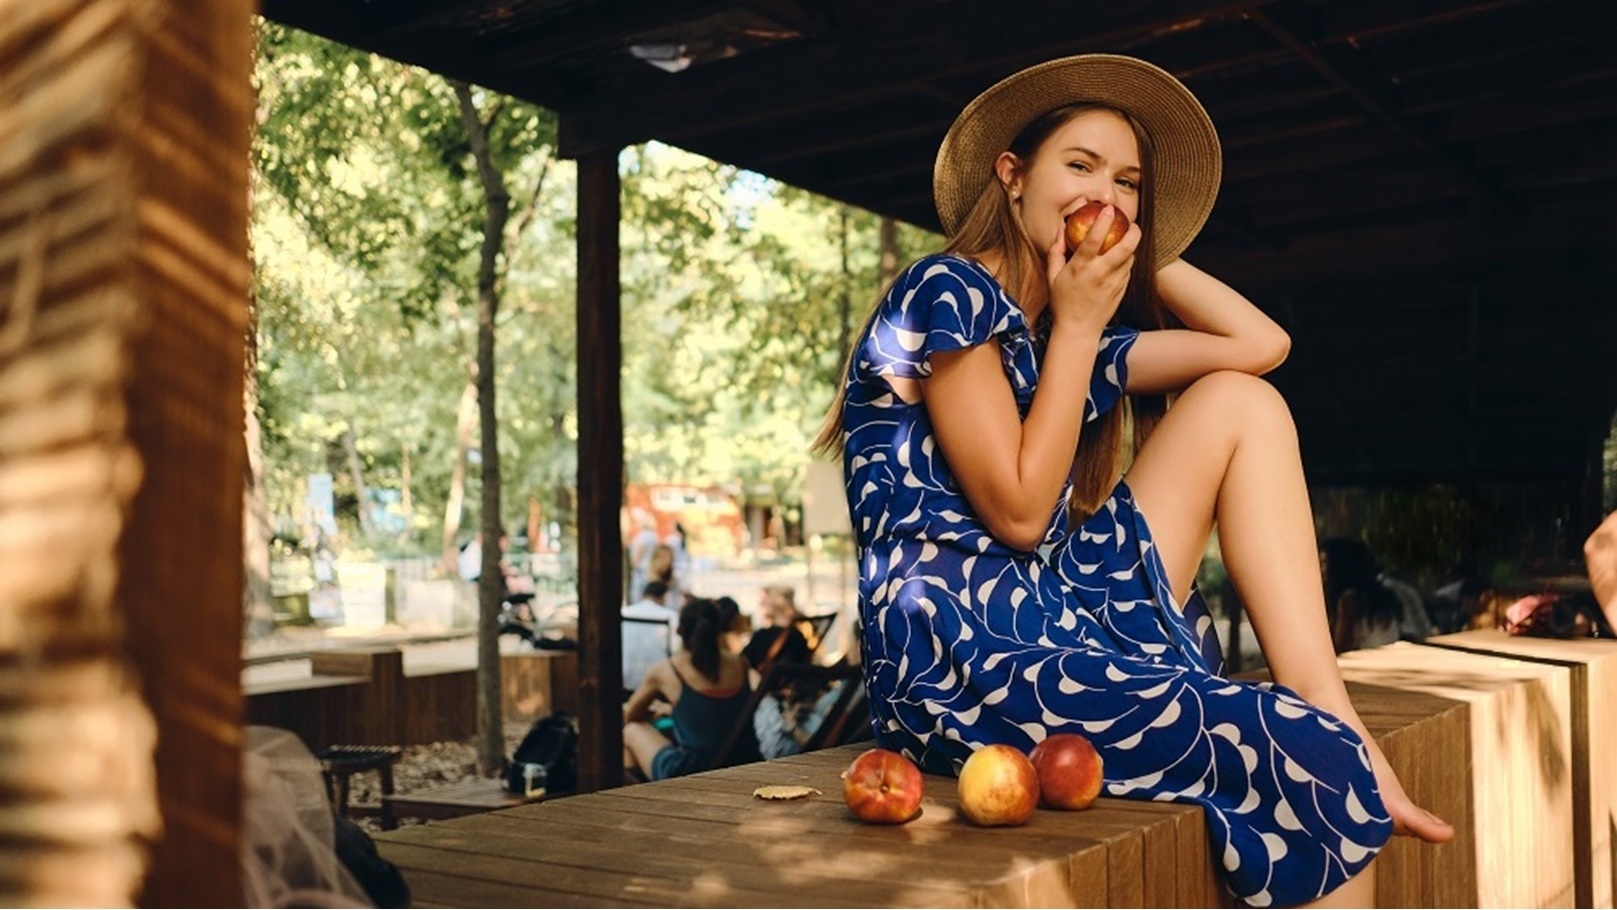 young-pretty-woman-in-dress-and-hat-barefoot-eatin-2021-08-26-18-52-15-utc